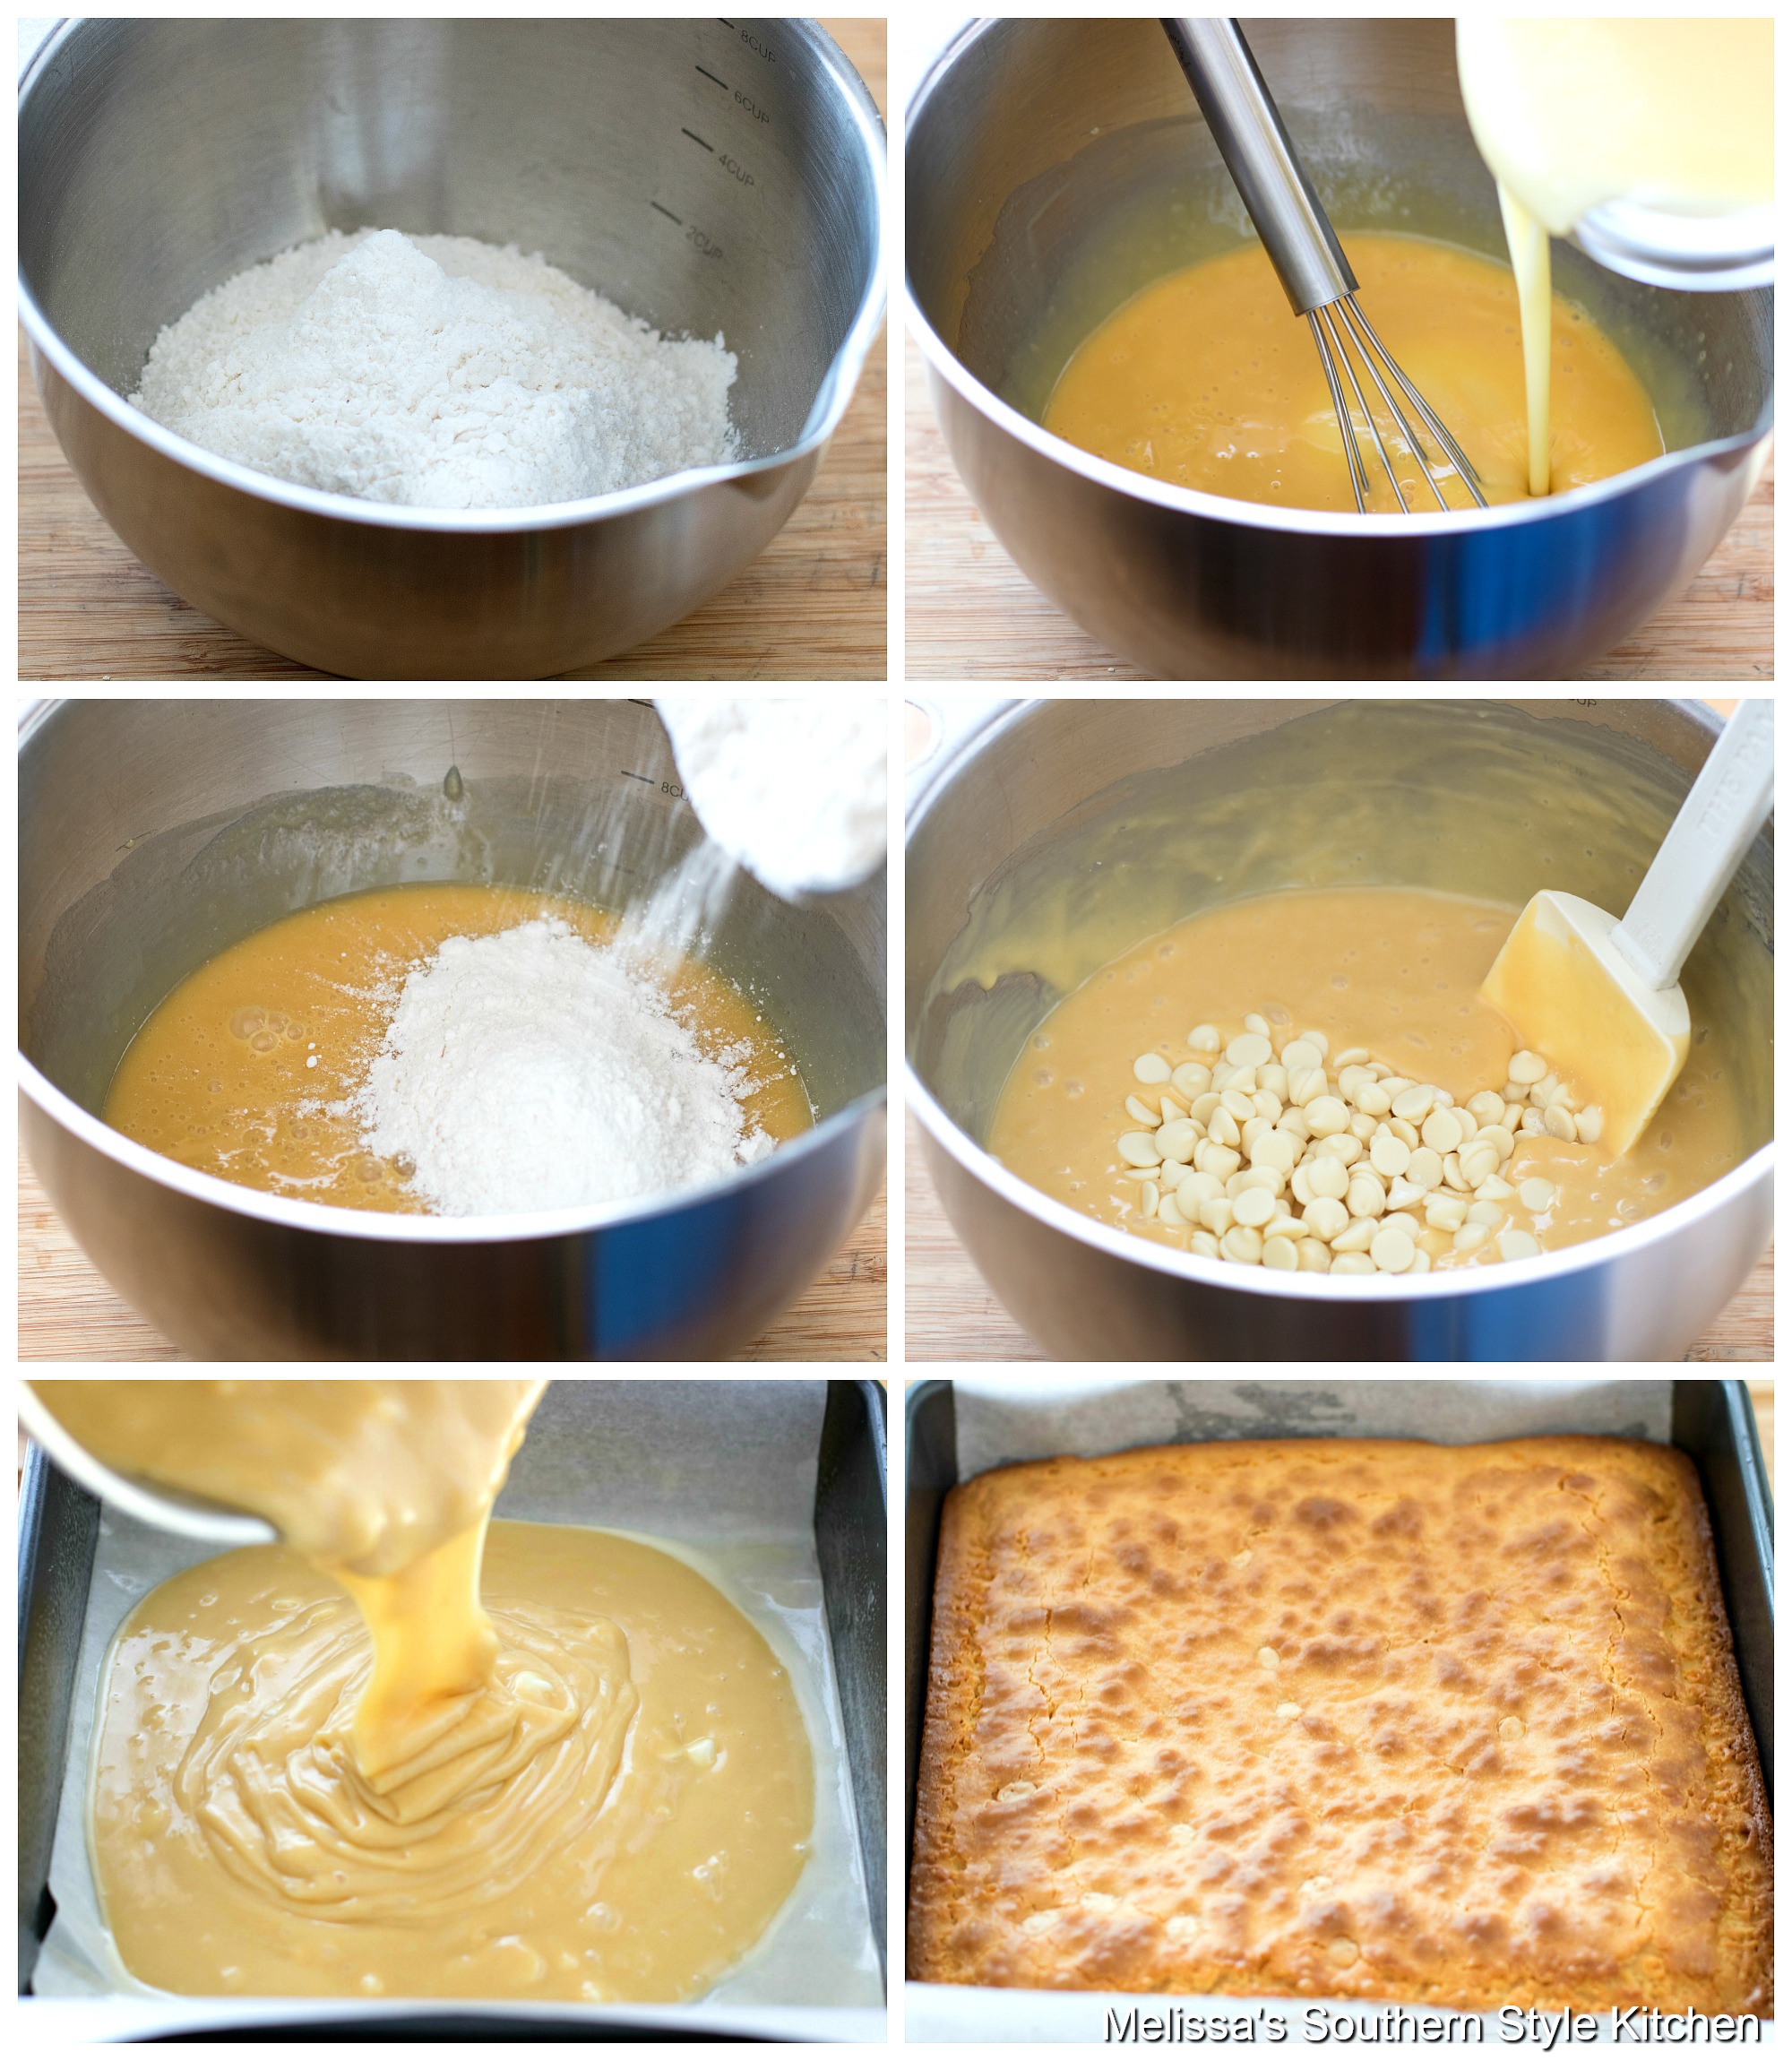 Step-by-step preparation images and ingredients for white chocolate brownies